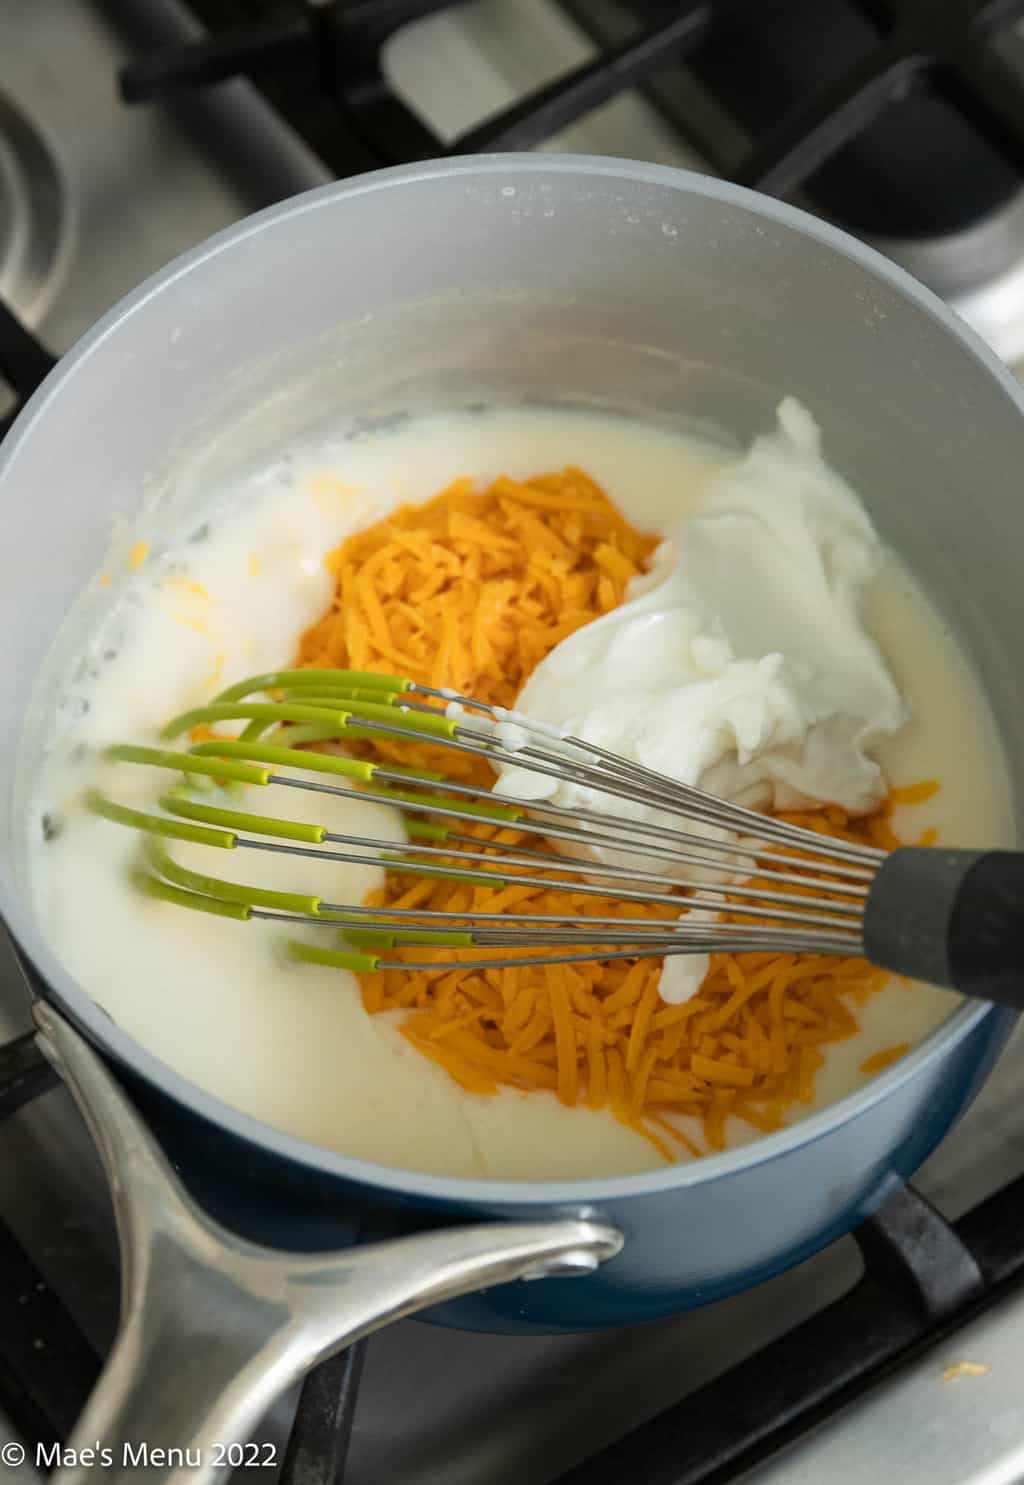 The saucepan with cheddar cheese, Greek yogurt, and a whisk.